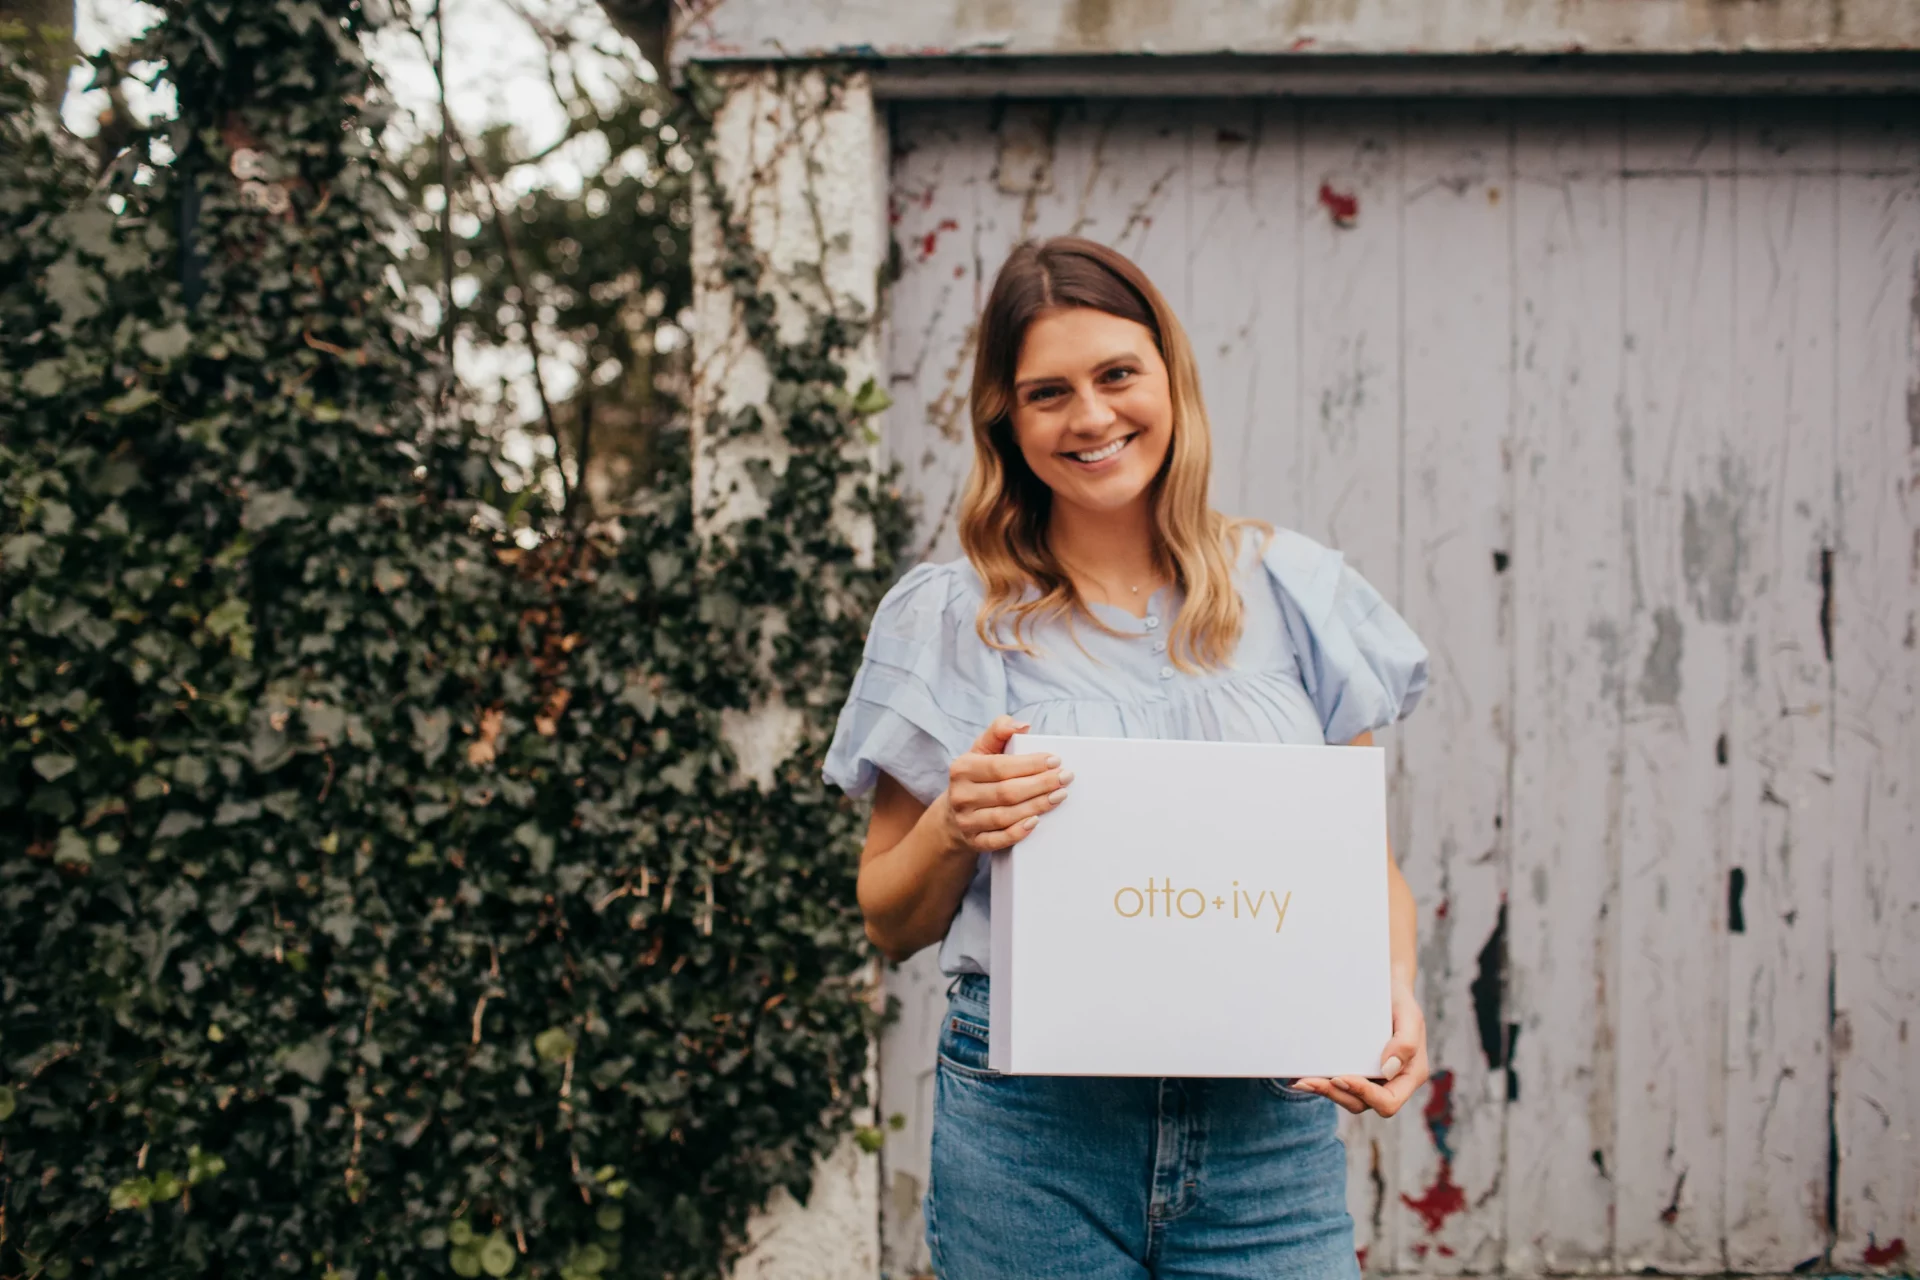 Laura Schofield, small business owner - Otto & Ivy